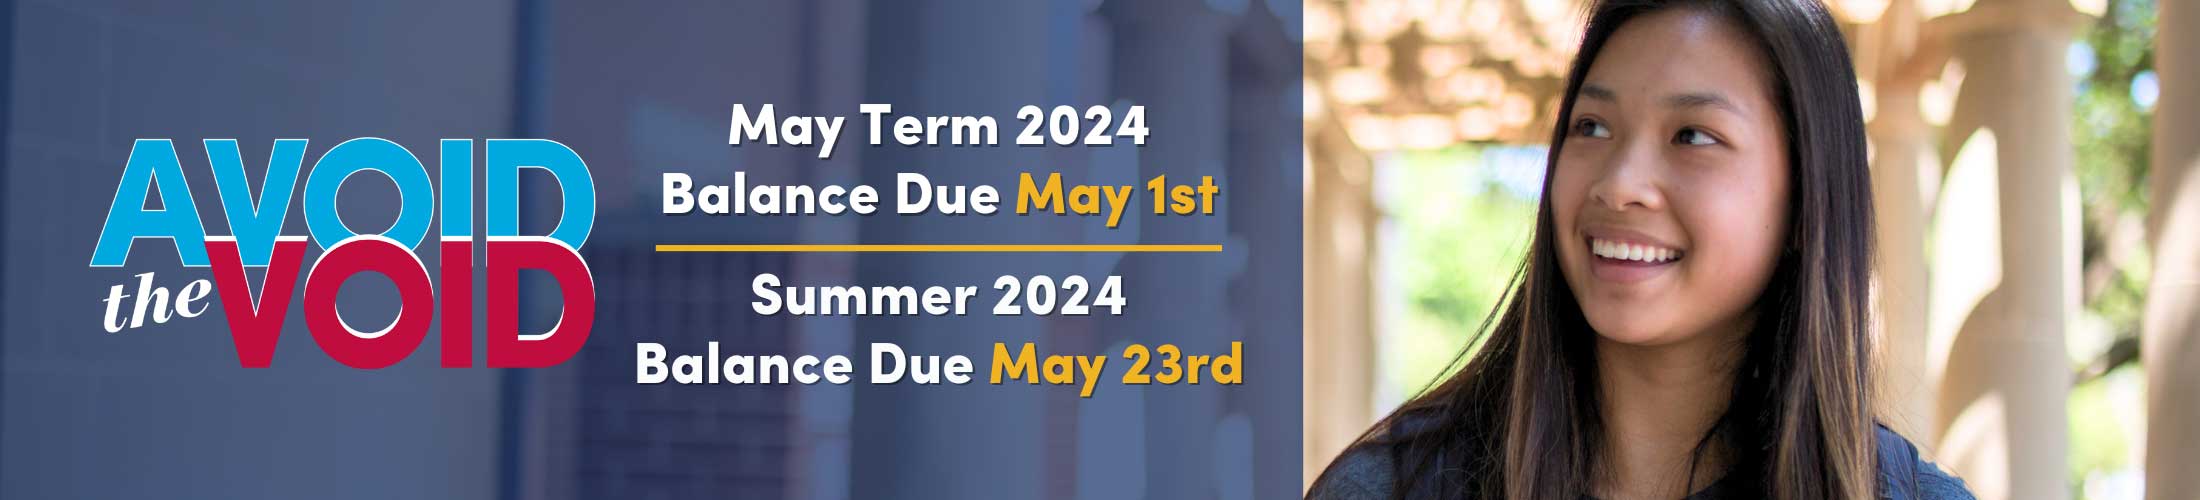 Avoid the Void May Term 2024 Balance Due May 1 and Summer 2024 Balance Due May 23